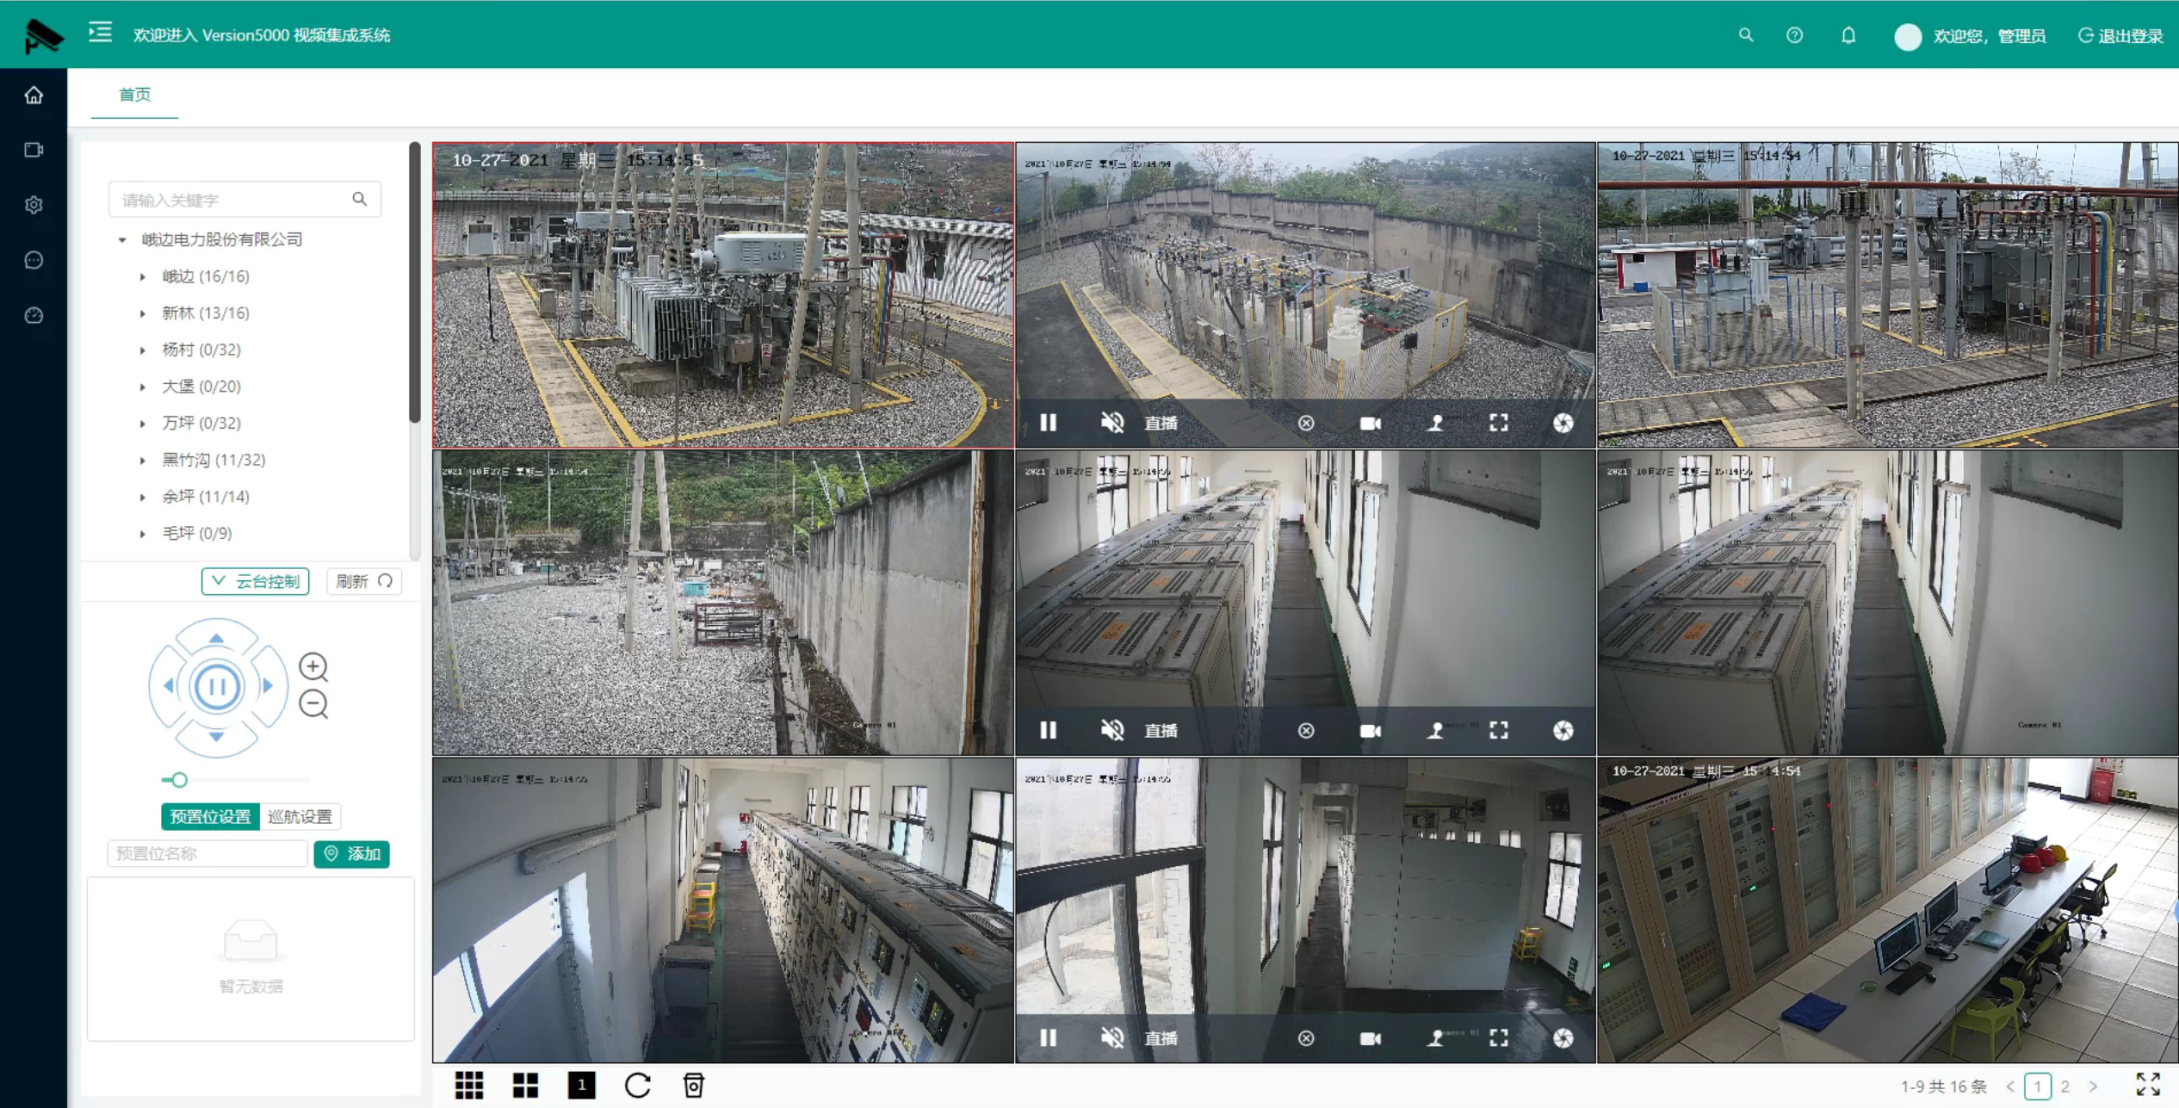 Vision5000 Video Surveillance and Intelligent Auxiliary System Integrated Monitoring Platform